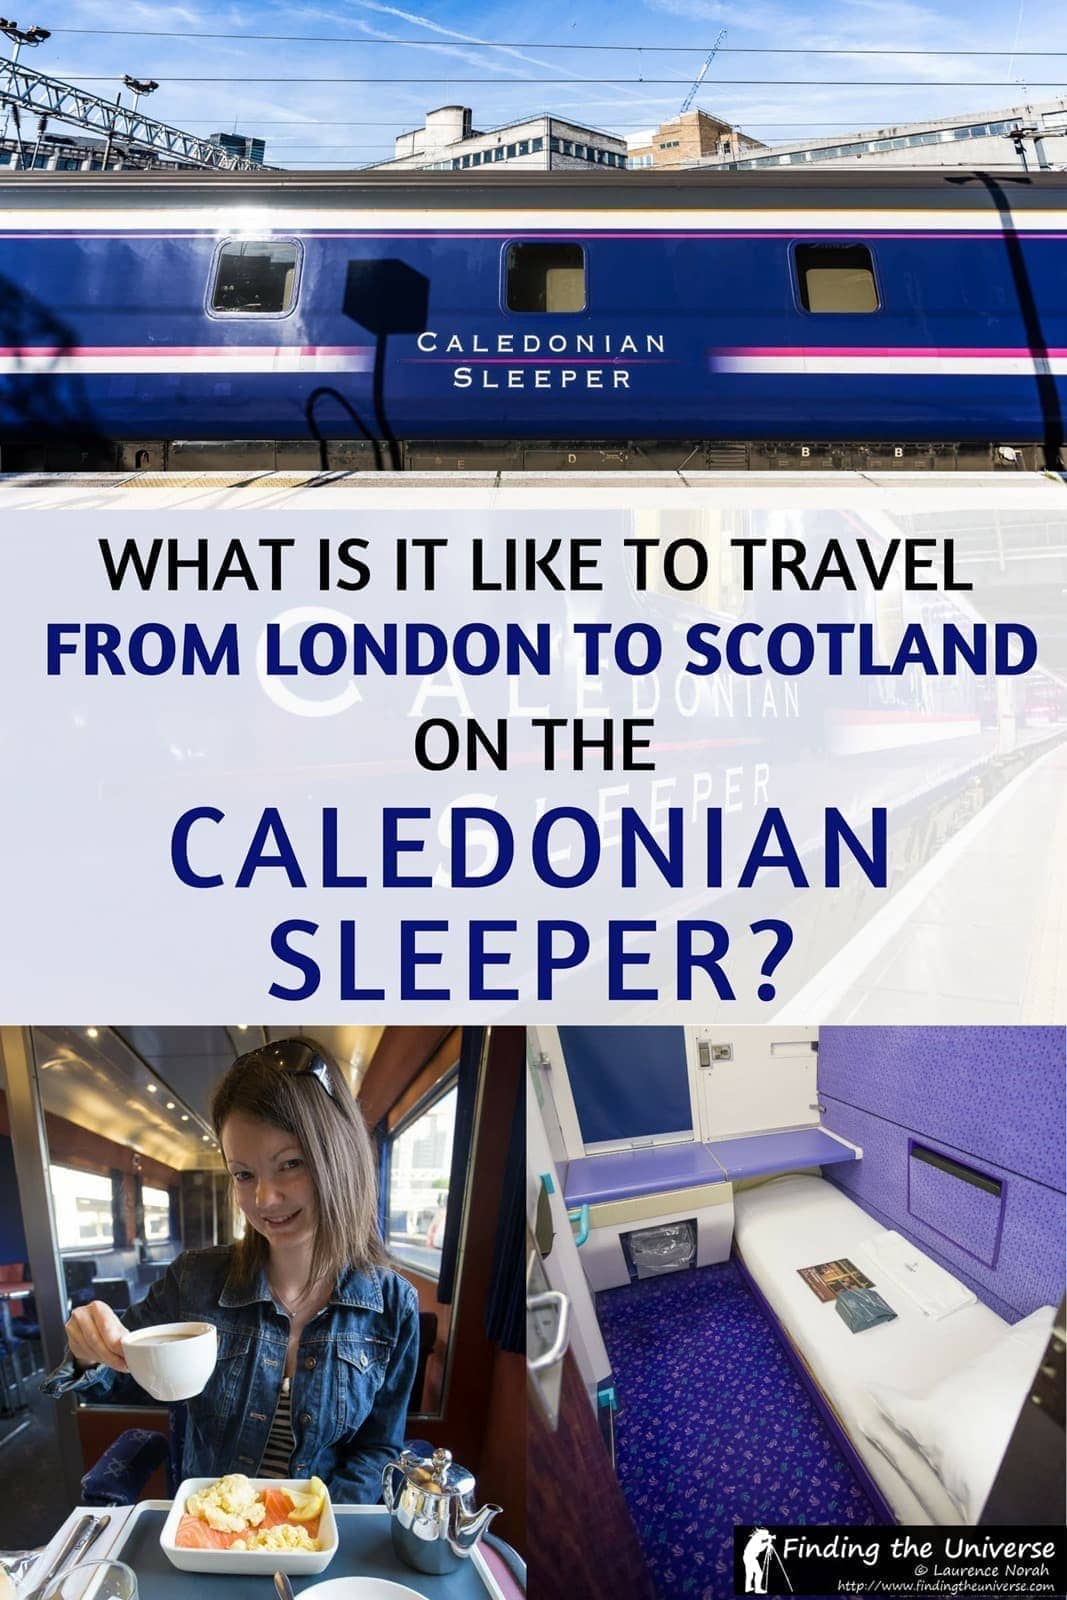 Looking for an overnight sleeper train in the UK? Look no further than the Caledonian Sleeper, which runs regular services from London to multiple destinations in Scotland, and back again. This post tells you everything you need to know about riding the Caledonian Sleeper!